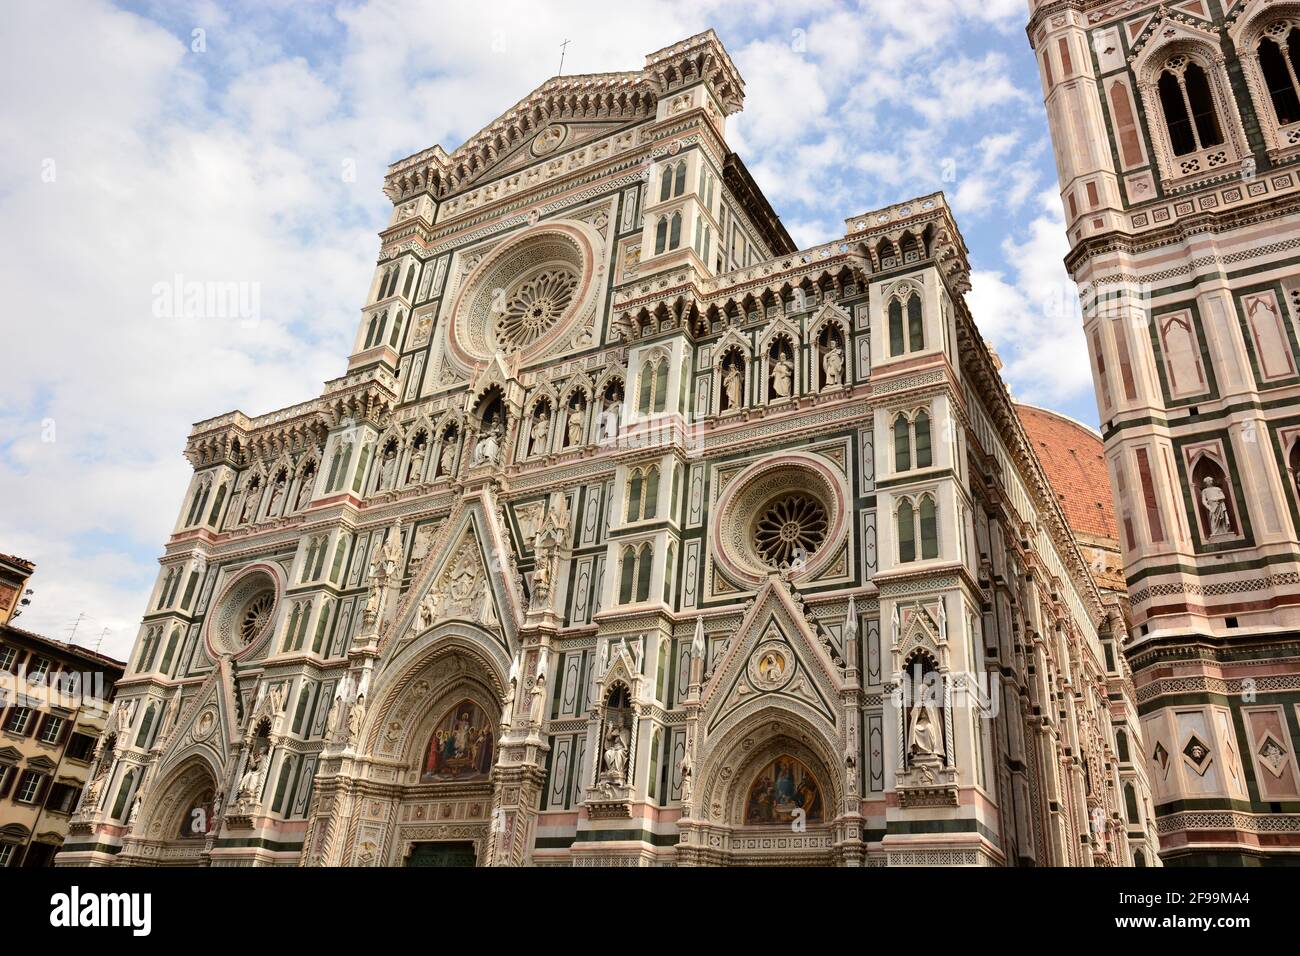 Italy, Florence, the cathedral Santa Maria del Fiore dates from the 13 th century, it is famous for its grandiose dome, true architectural prowess. Stock Photo